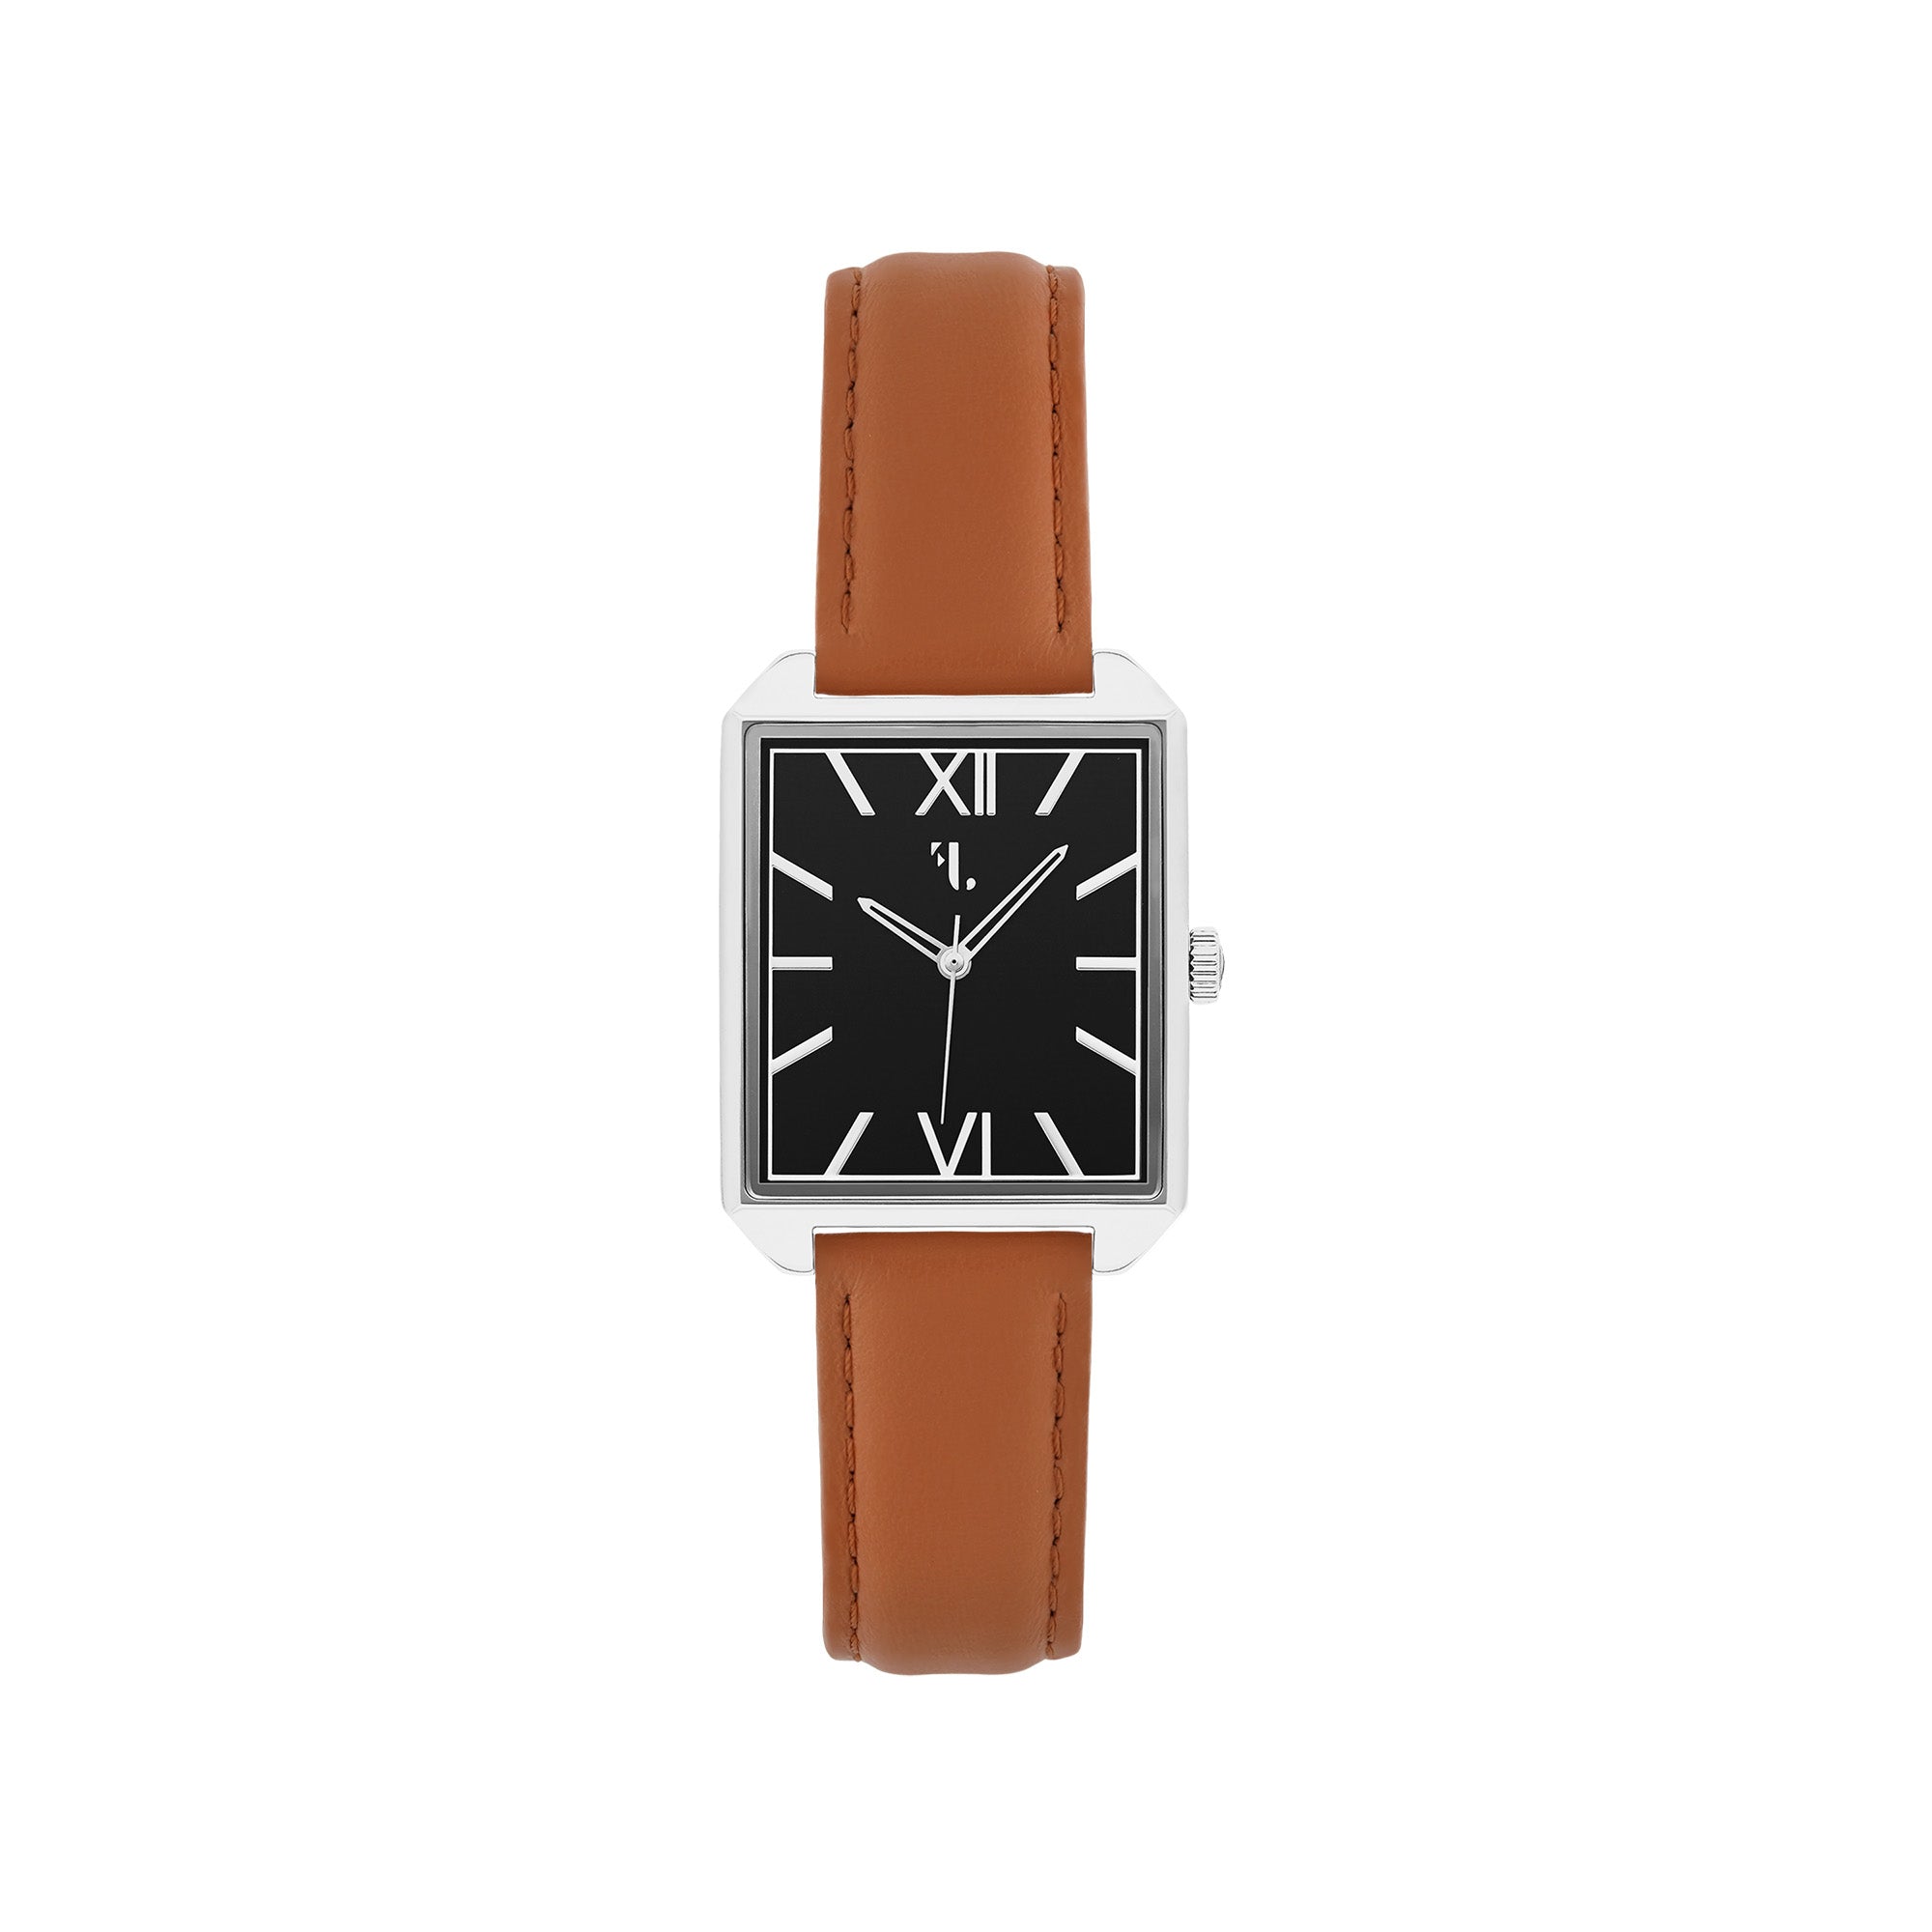 Discover a unique and modern men's watch from Five Jwlry designed in Montreal. This square-shaped watch with a sleek dial is accompanied by a tan leather strap. It is equipped with a silver case and hands with a black dial. It is designed with the greatest care with a quartz mechanism and it has a water resistance of 5ATM.